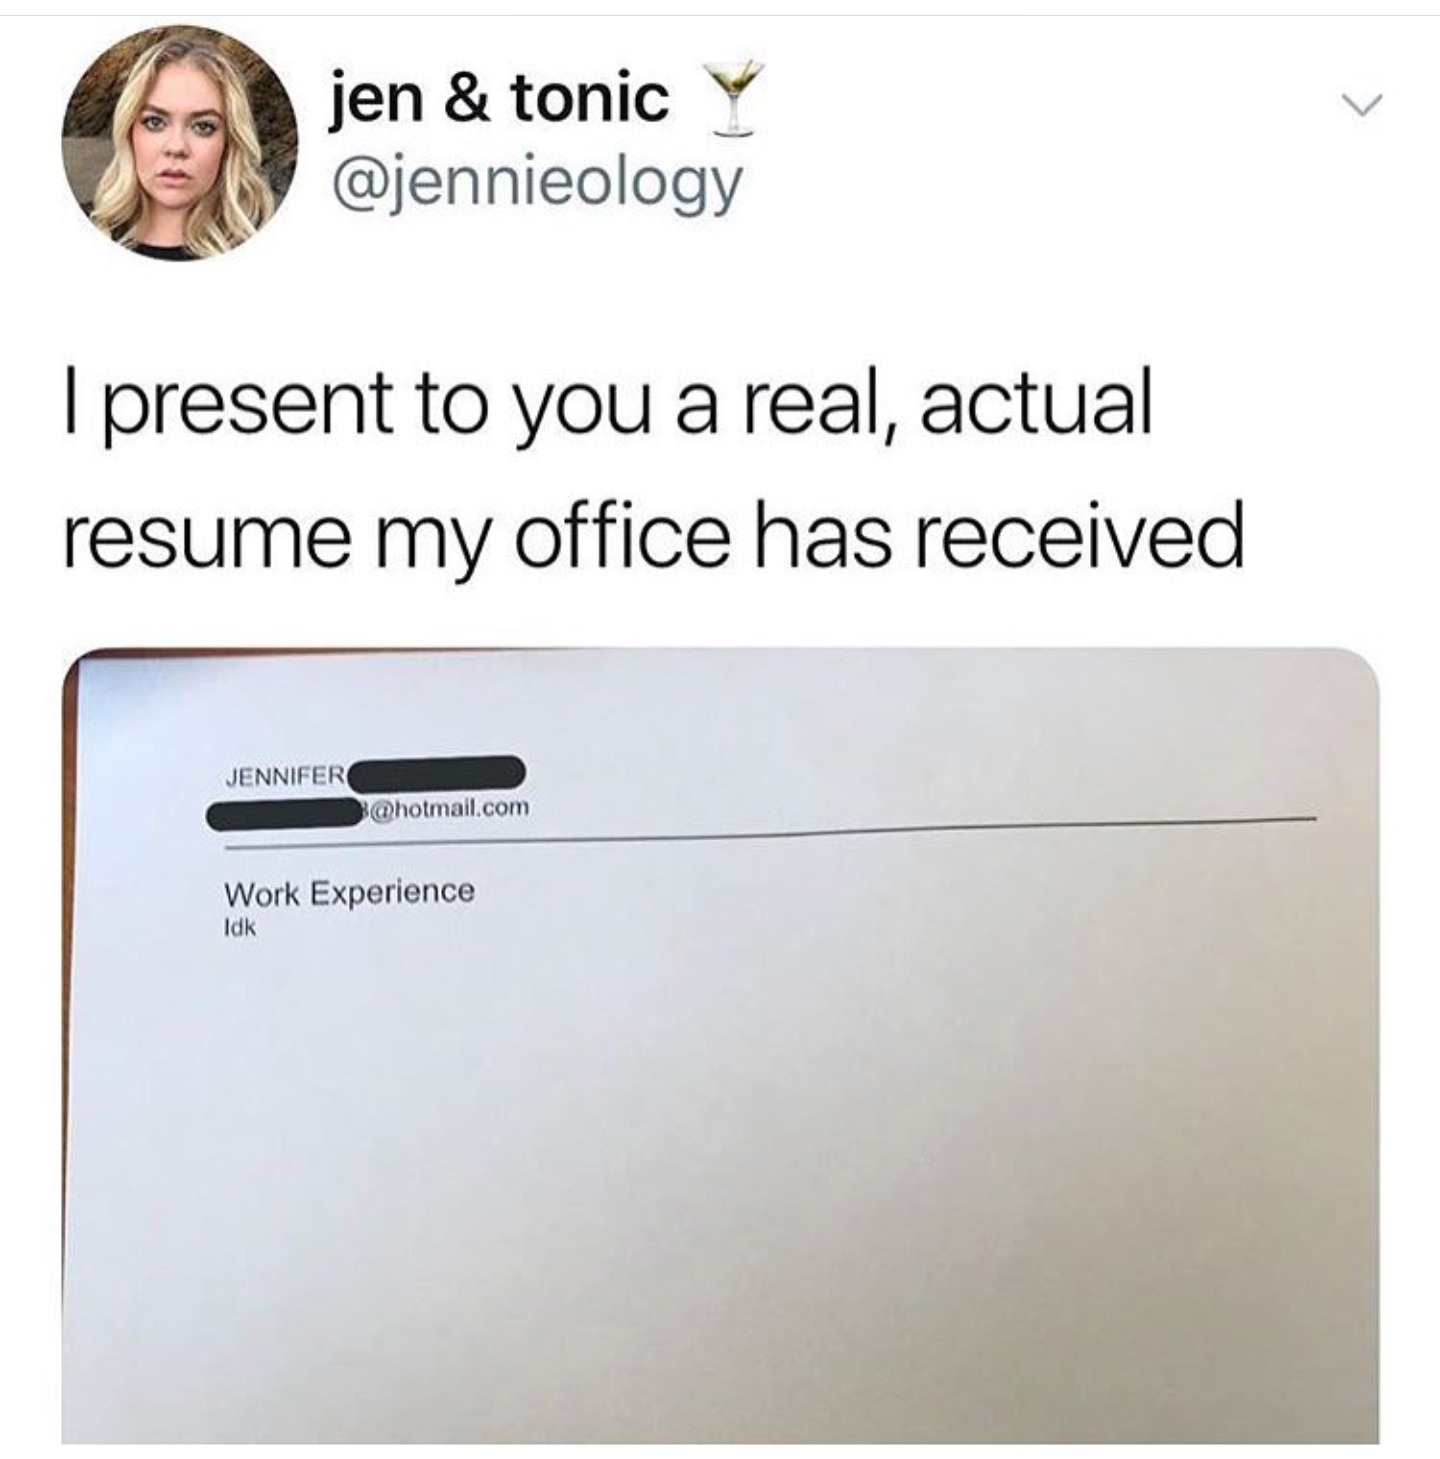 fuck you resume - jen & tonic y I present to you a real, actual resume my office has received Jennifer .com Work Experience Idk